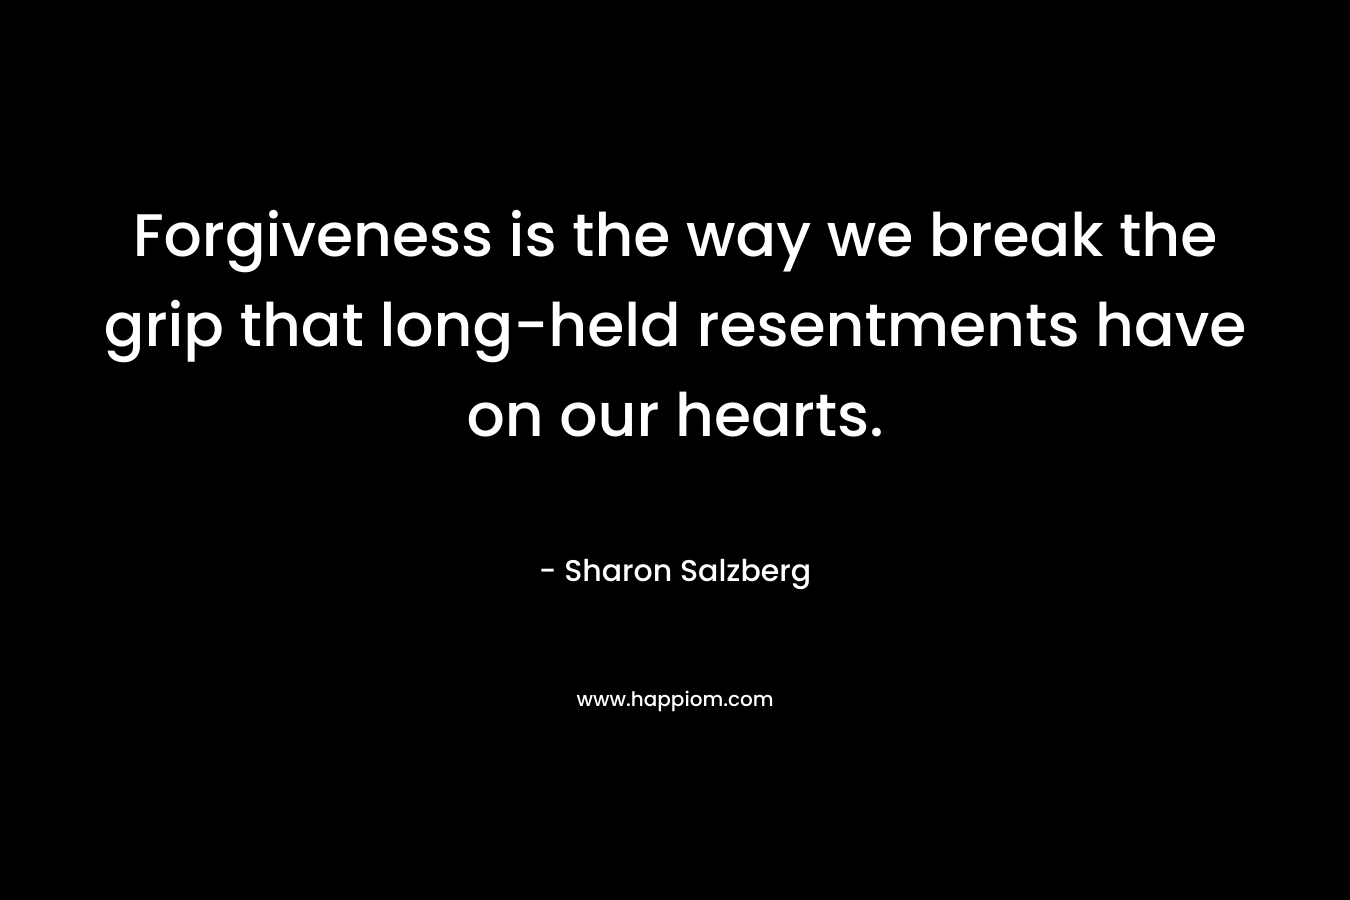 Forgiveness is the way we break the grip that long-held resentments have on our hearts. – Sharon Salzberg